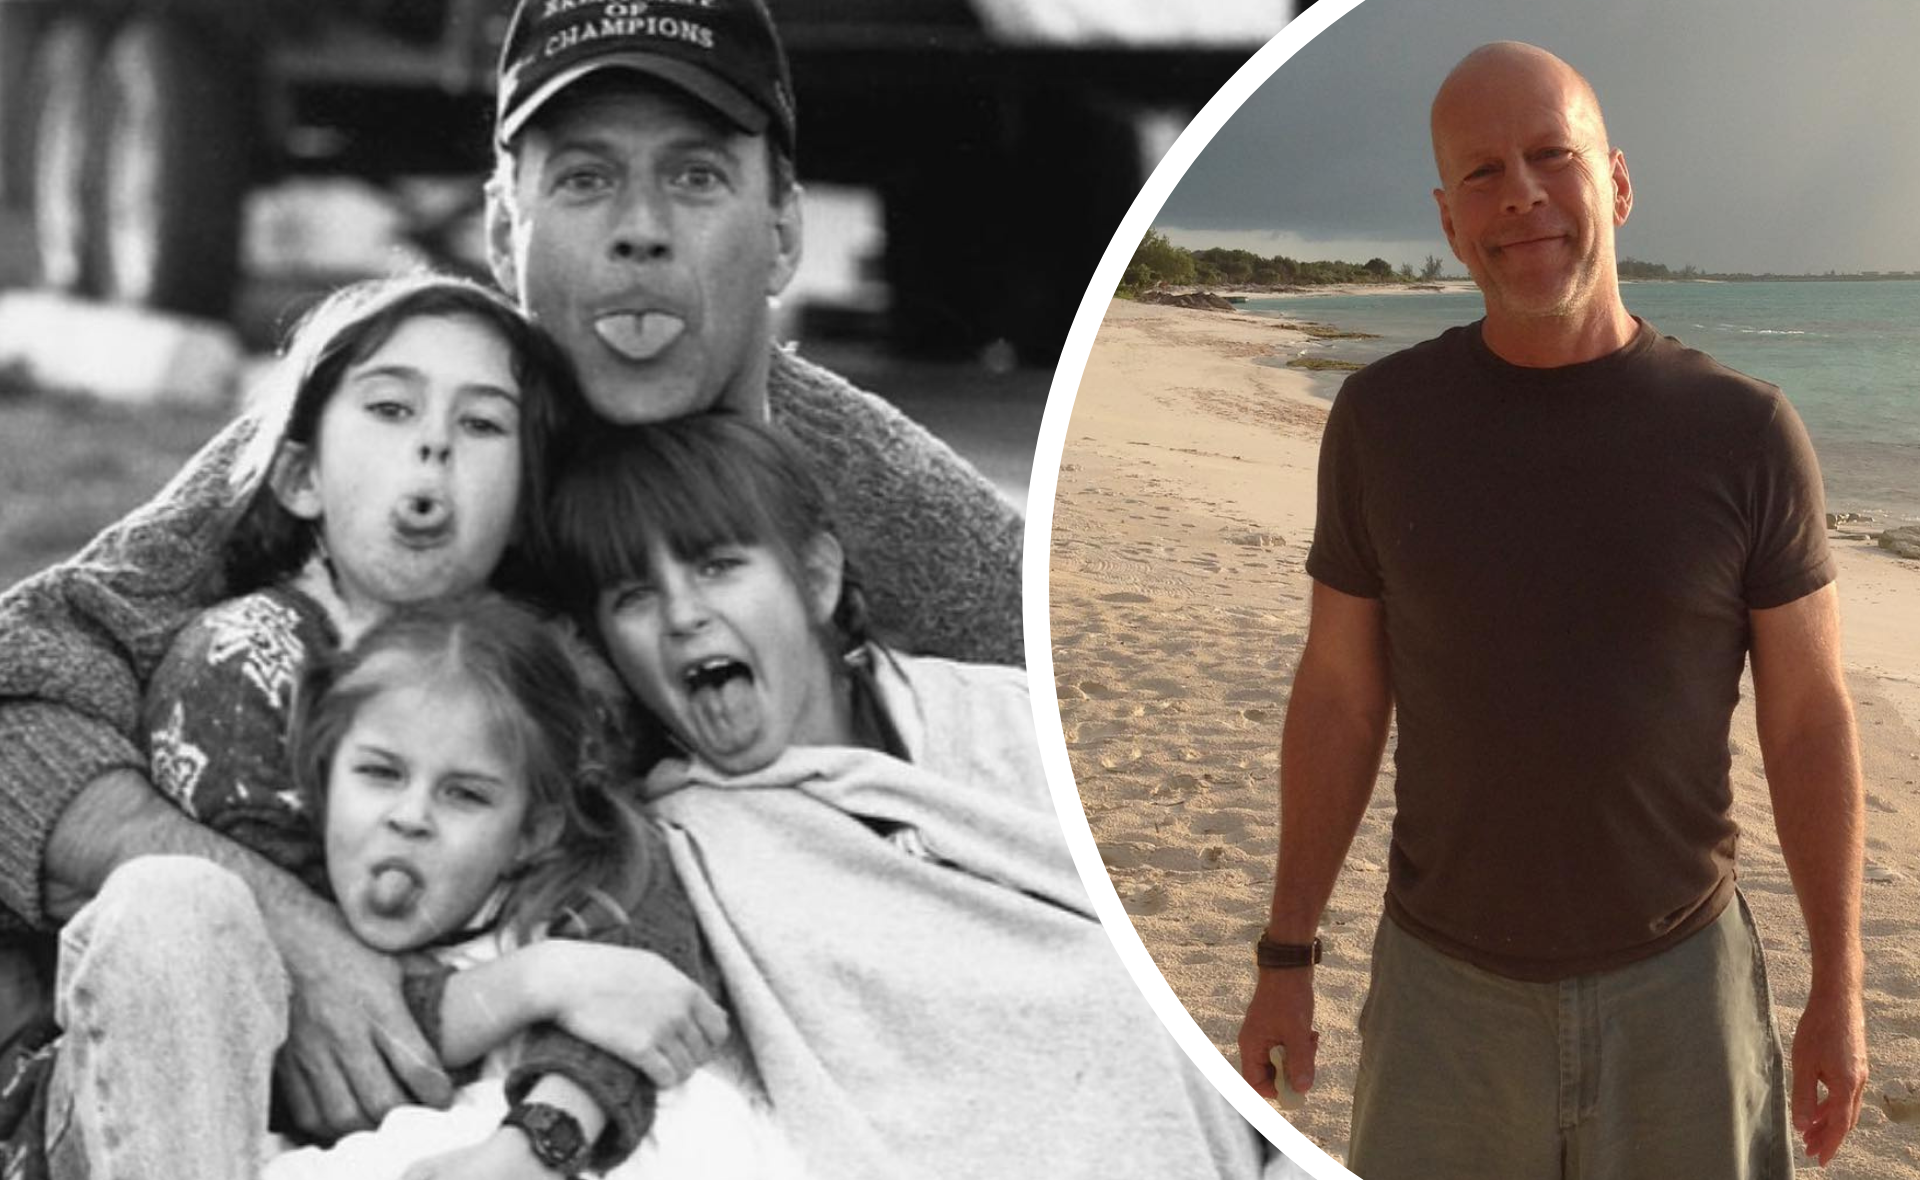 Bruce Willis’ friends and family loving tributes during his struggle with dementia